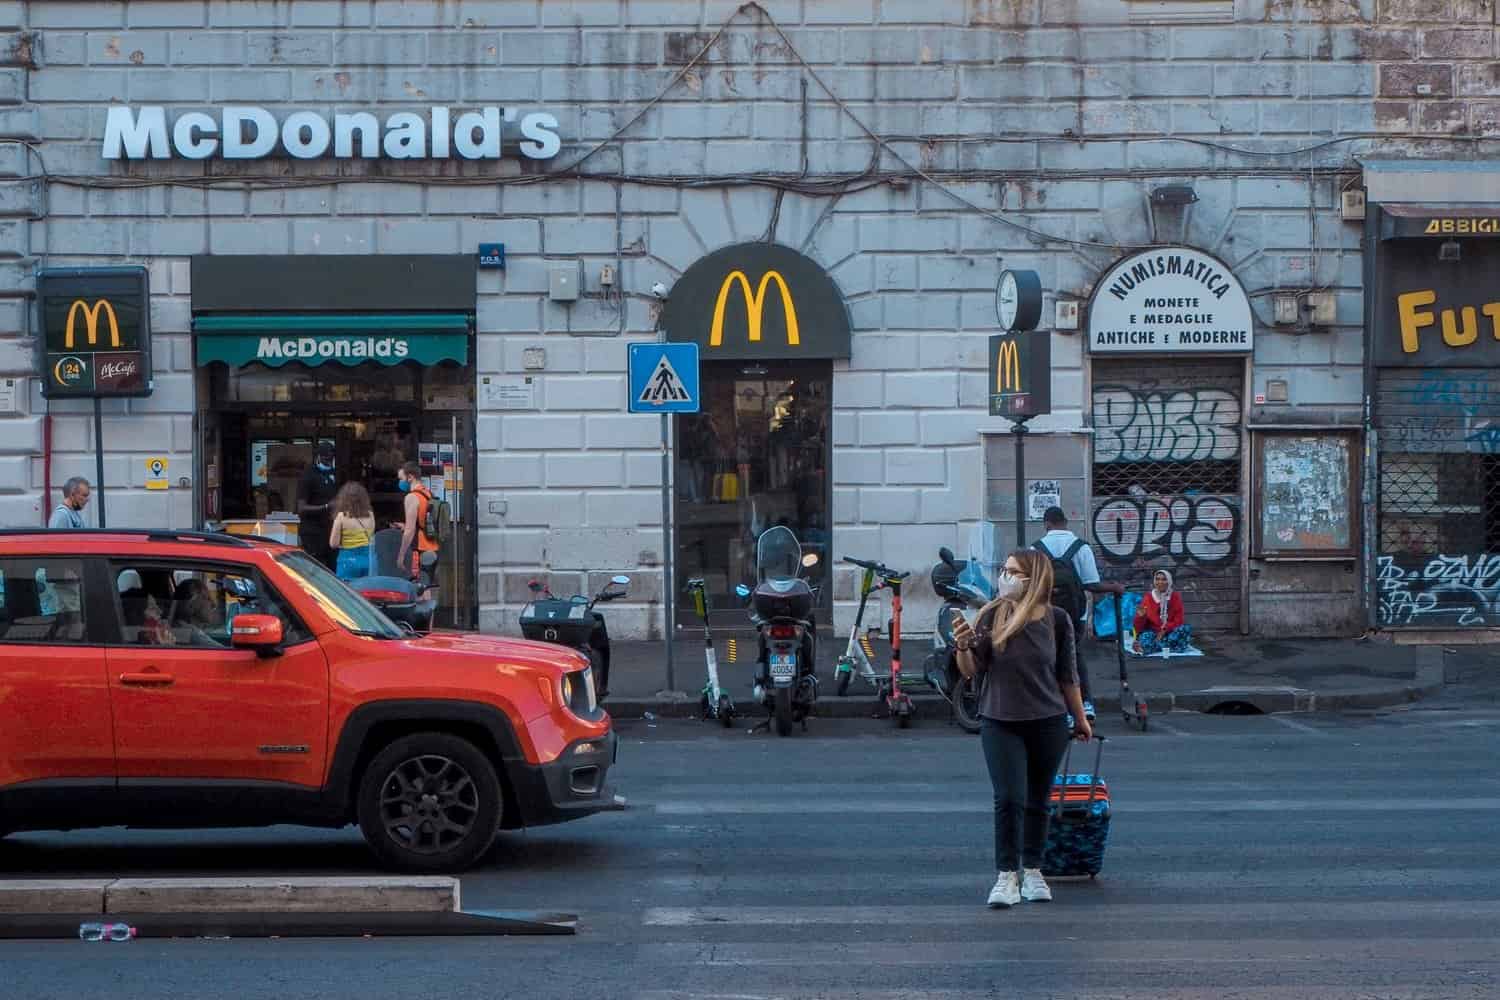 Car parking at McDonald's storefront in Rome